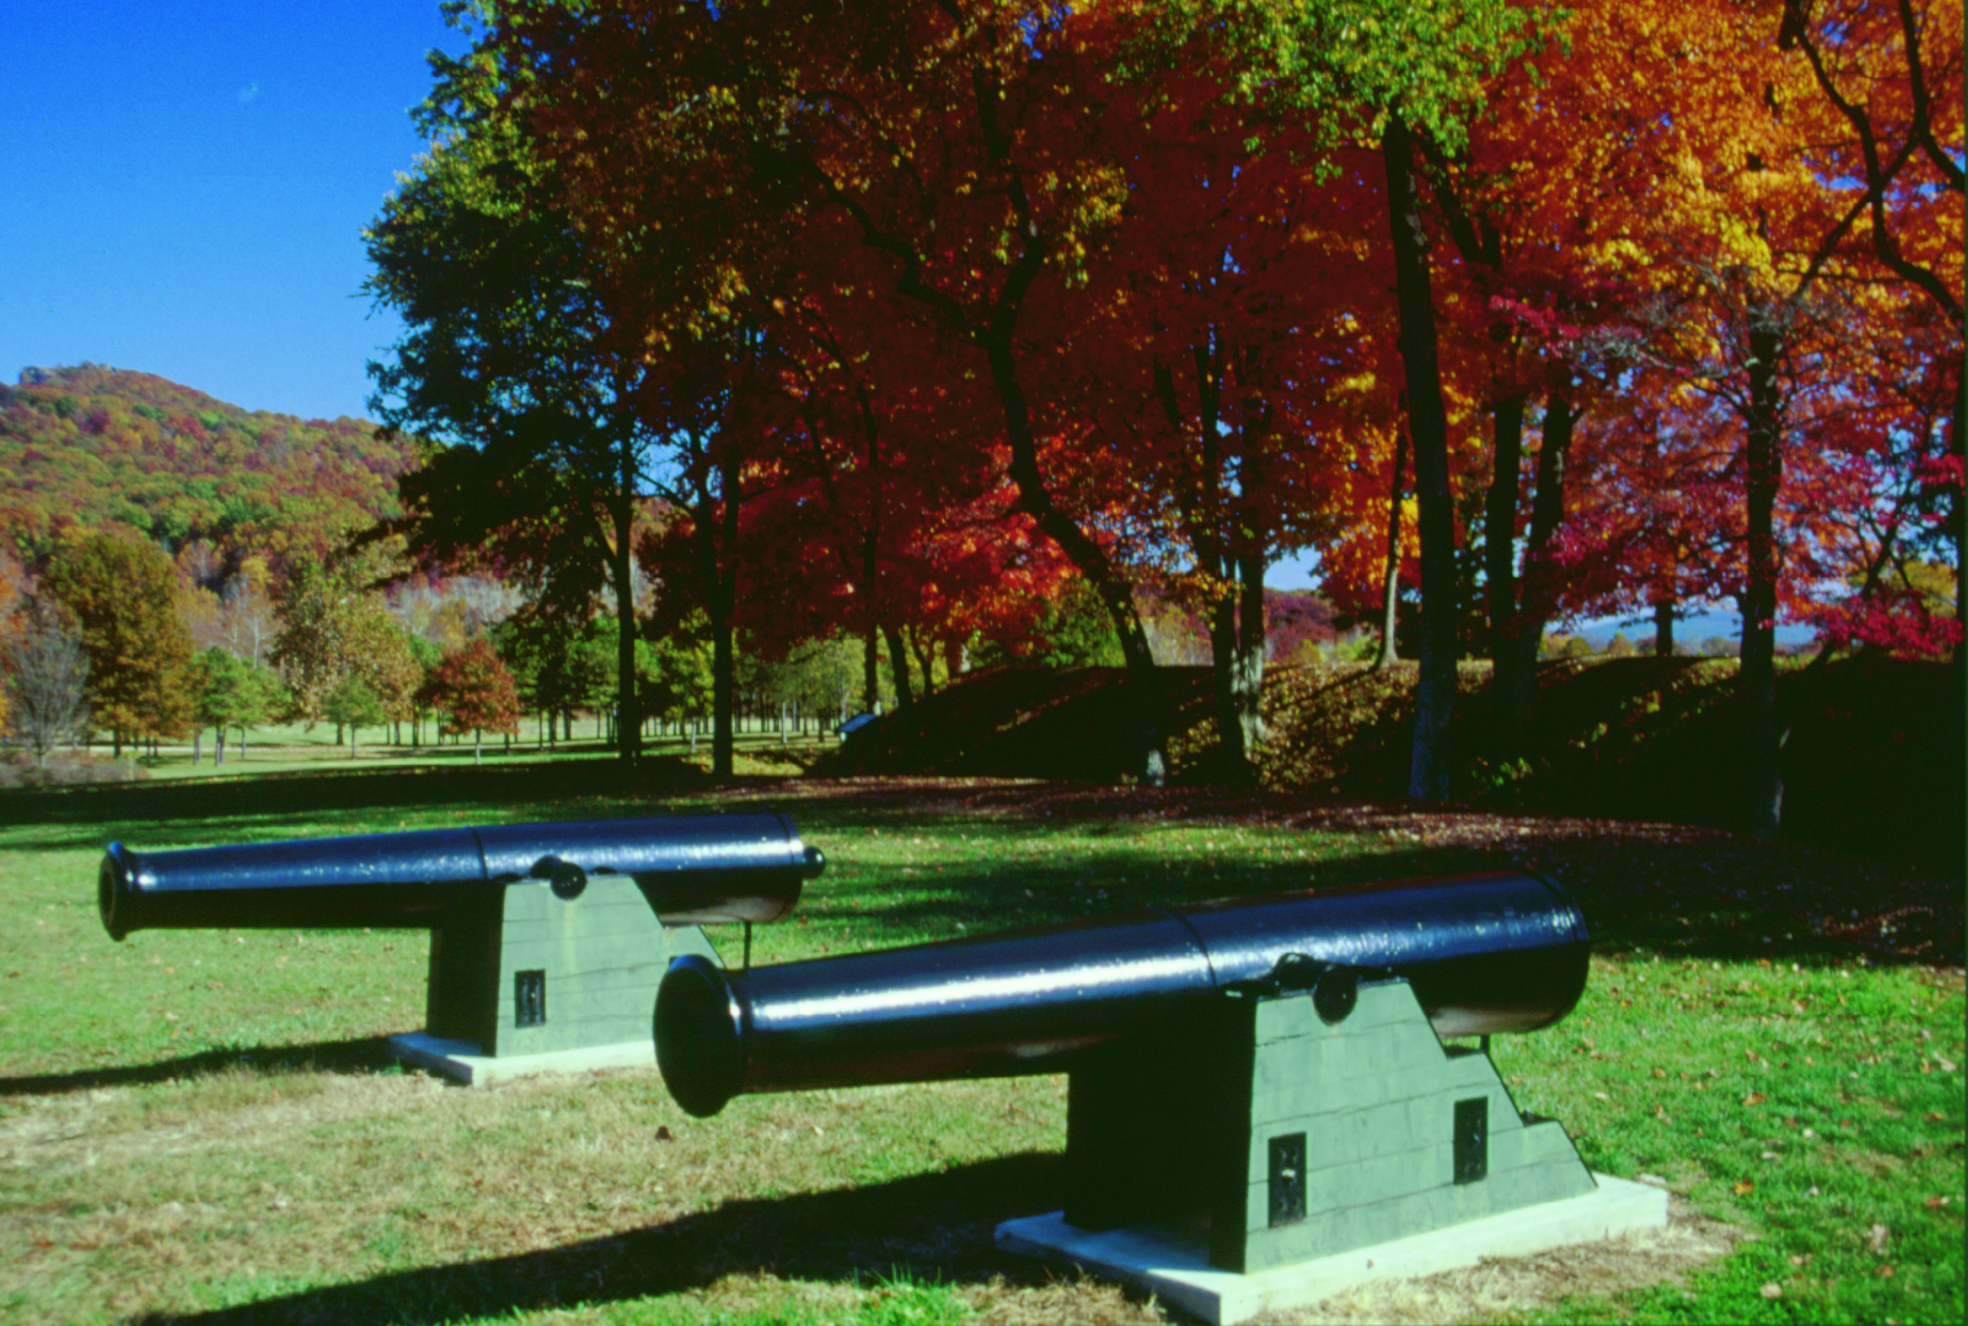 Two canons on display near the fort